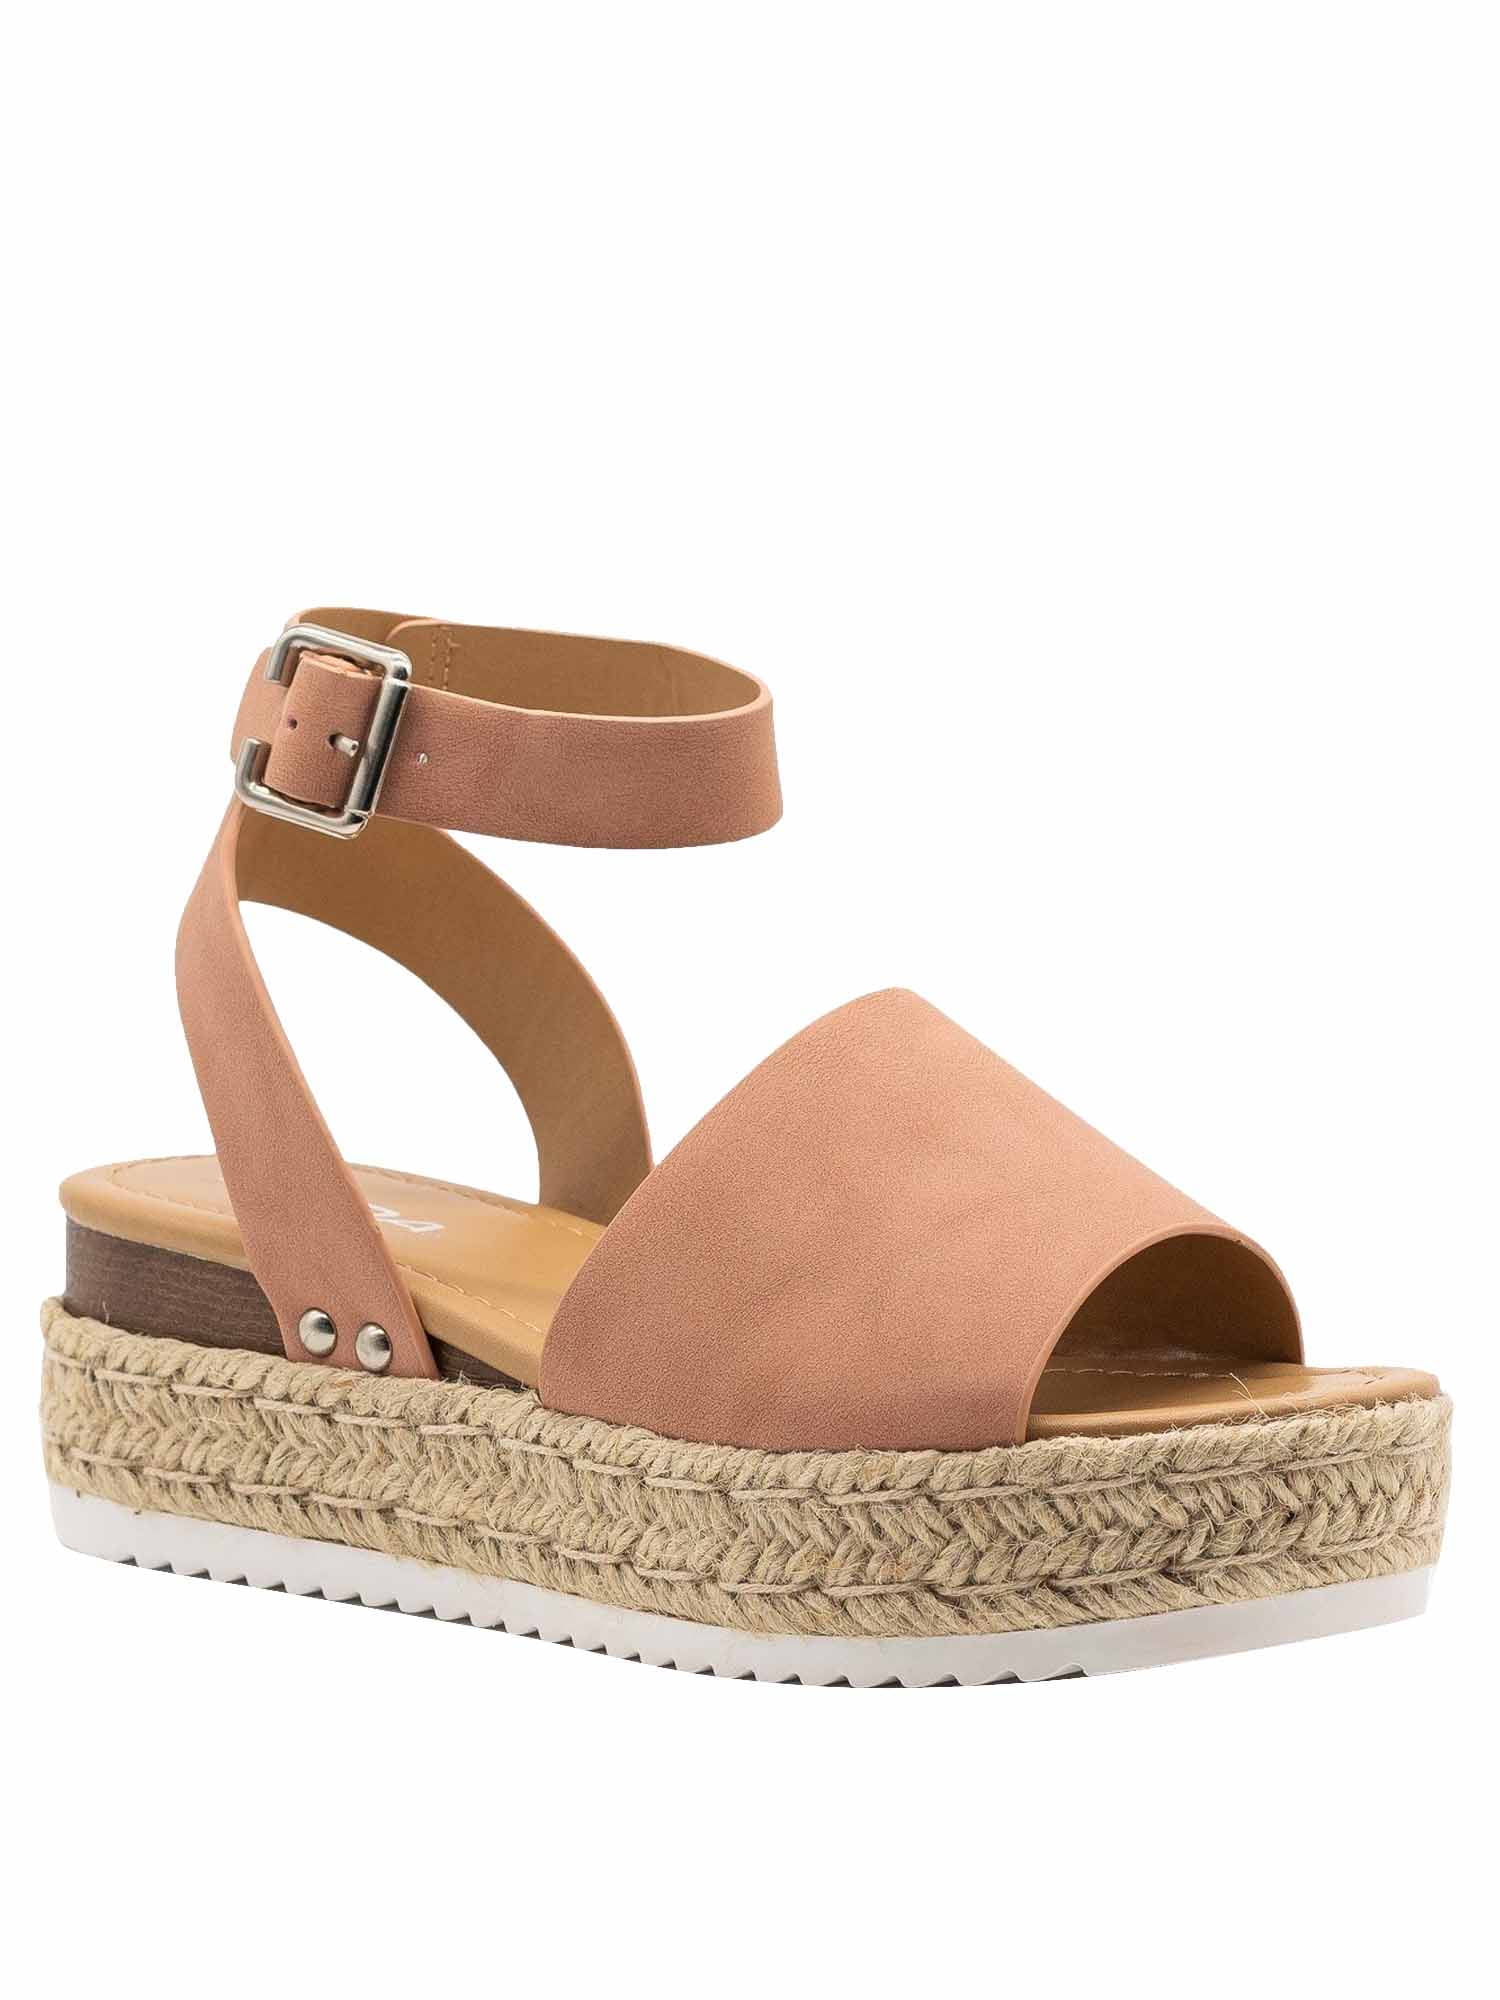 Wedge Sandals for Women,Womens Casual Espadrilles Trim Rubber Sole Flatform Studded Wedge Buckle Ankle Strap Open Toe Sandals